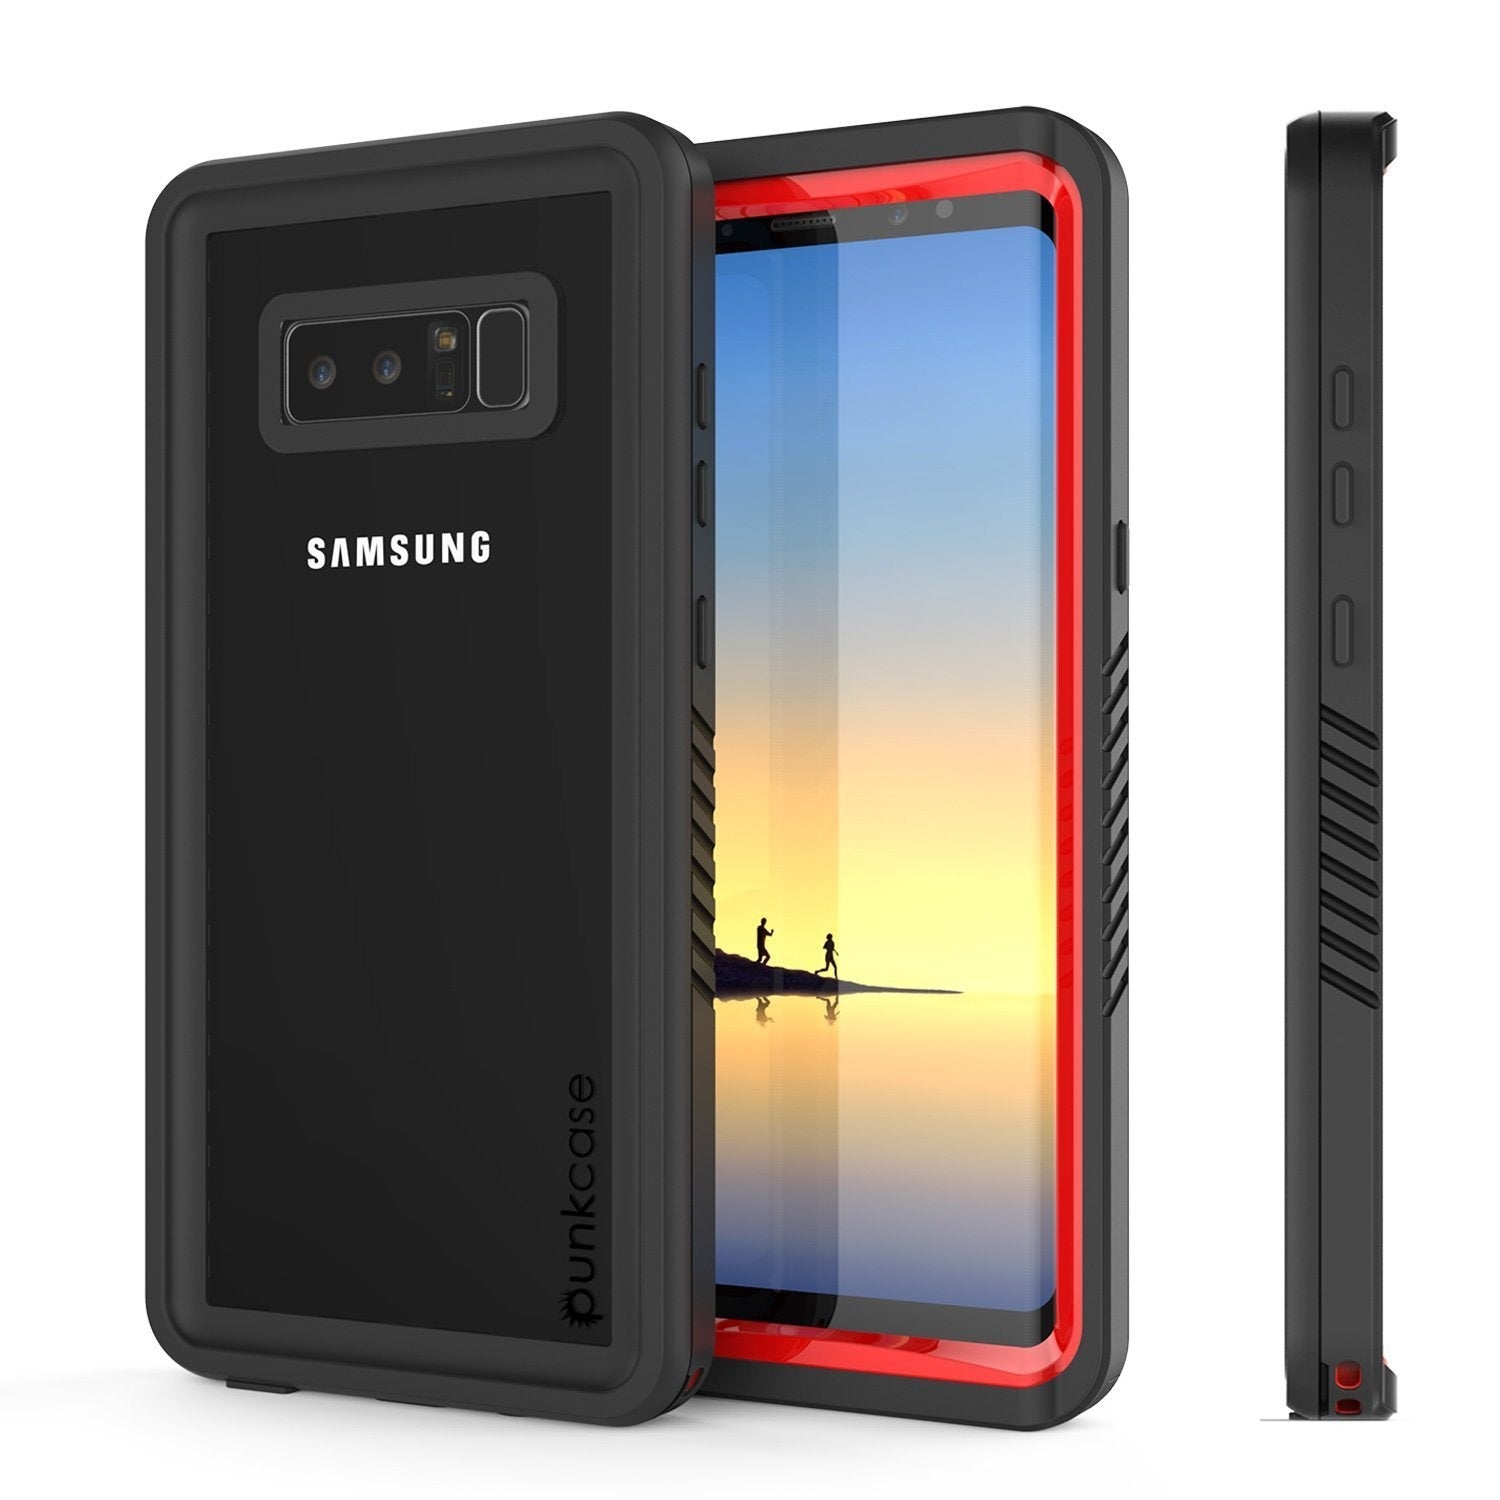 Galaxy Note 8 Case, Punkcase [Extreme Series] [Slim Fit] [IP68 Certified] [Shockproof] Armor Cover W/ Built In Screen Protector [Red] - PunkCase NZ